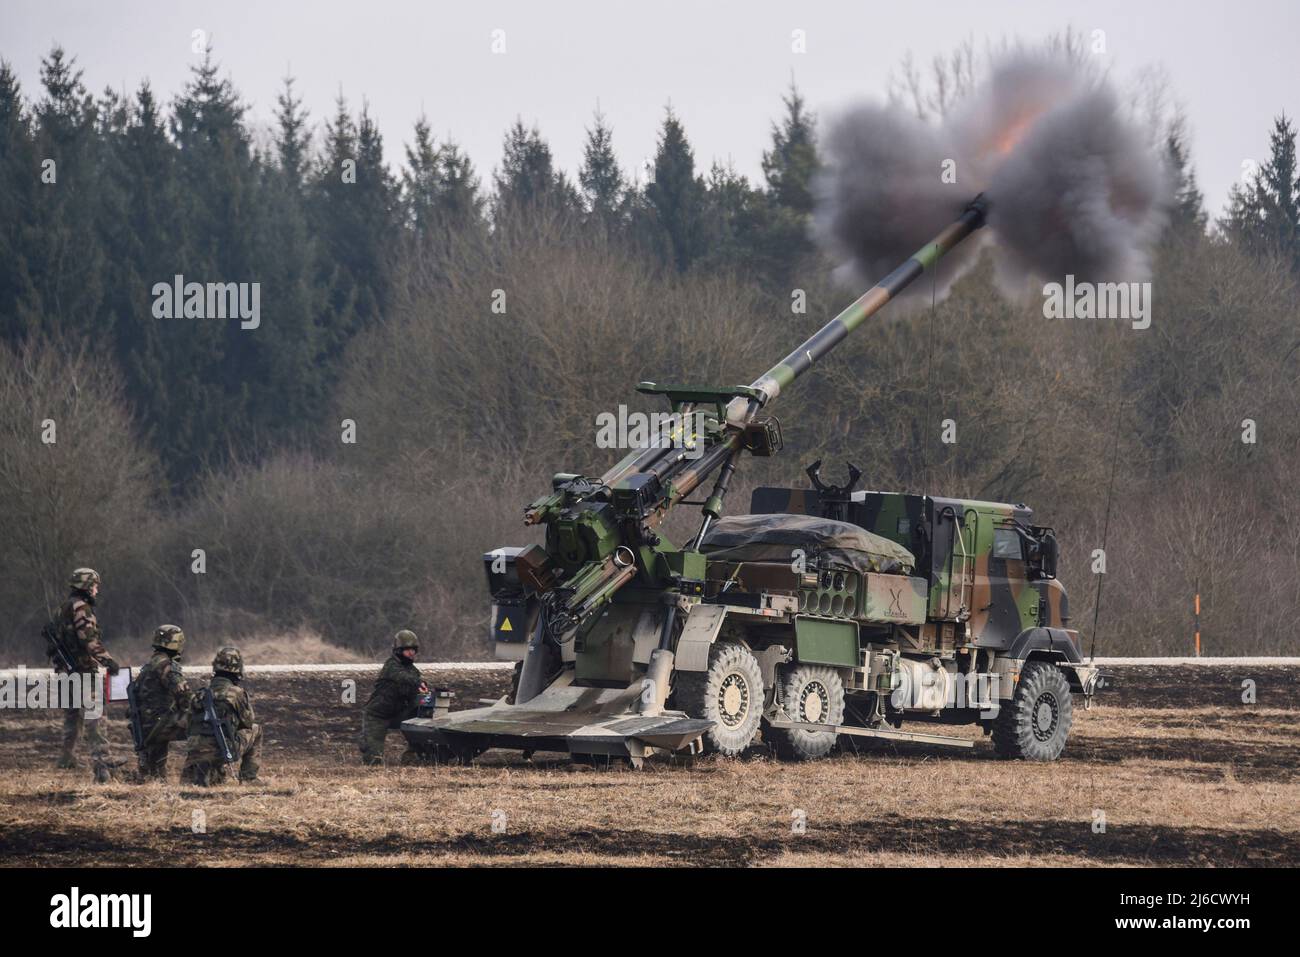 Grafenwoehr, Germany. 05 March, 2018. French Army artillerymen during a live fire mission with the Caesar self-propelled howitzer during exercise Dynamic Front at the Grafenwoehr training area, March 5, 2018 in Grafenwoehr, Germany.  Credit: Markus Rauchenberger/US Army Photo/Alamy Live News Stock Photo